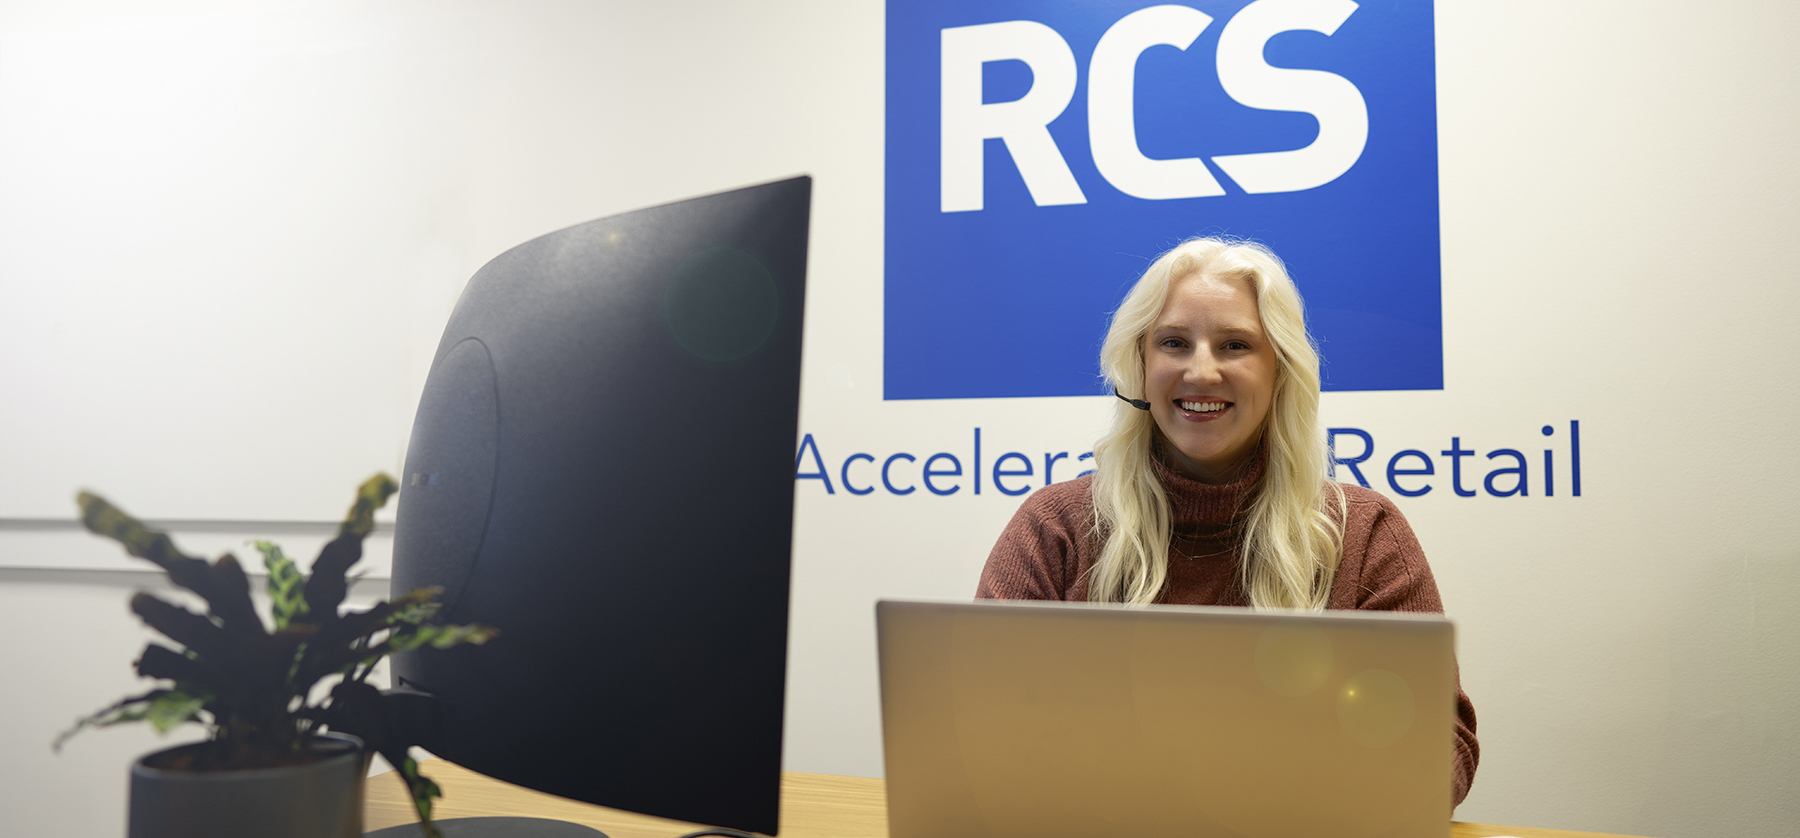 RCS Employee sitting at a desk with a computer taking support calls with a blue RCS logo in the background